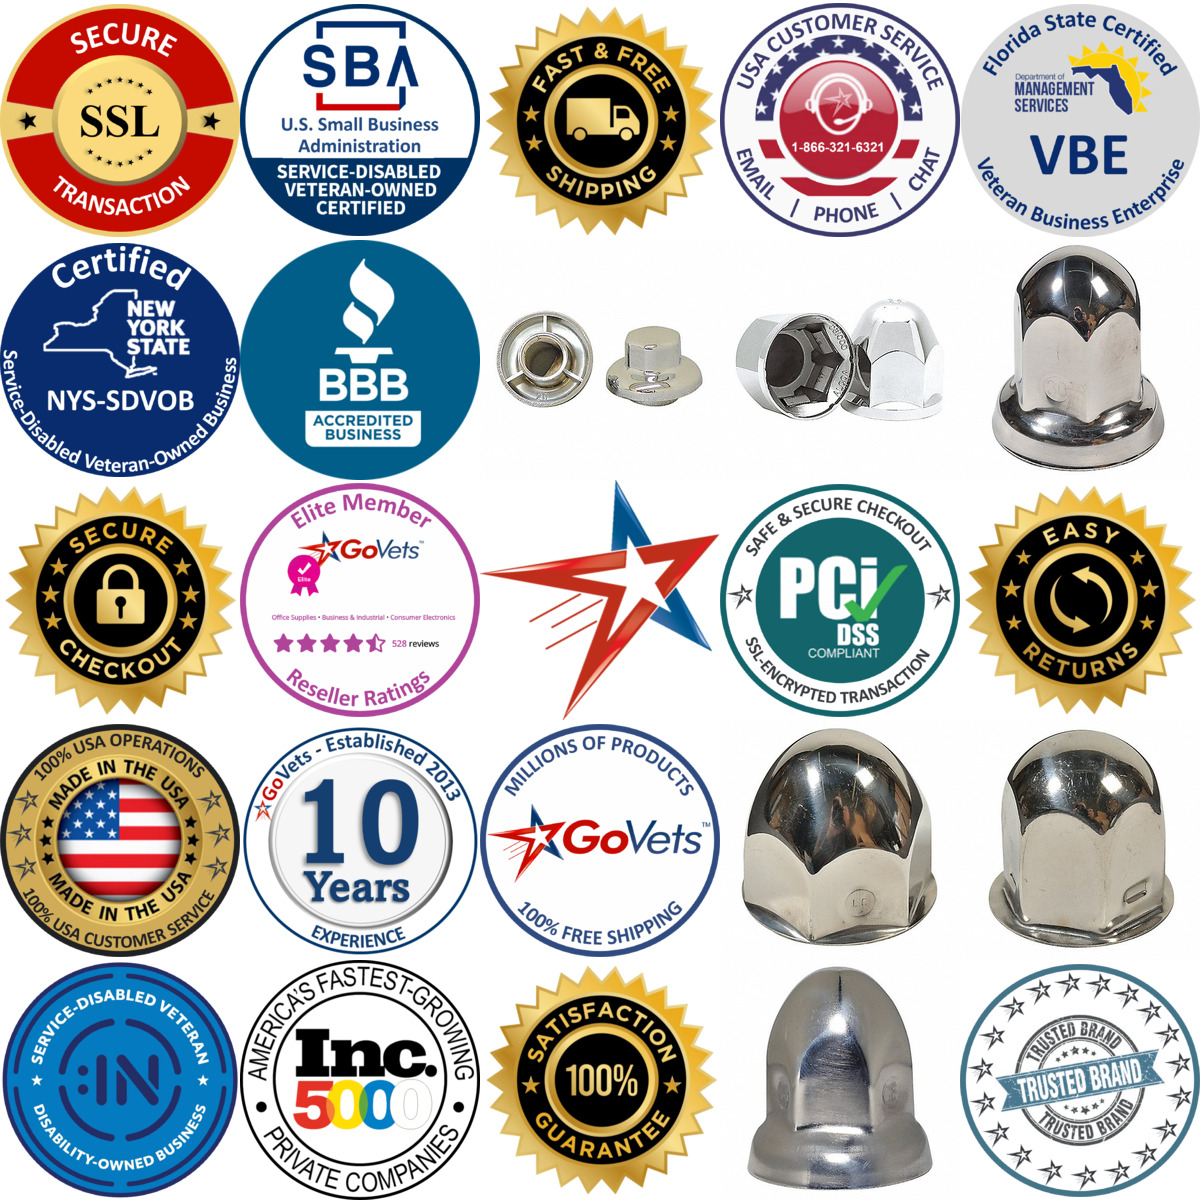 A selection of Wheel Nut Covers products on GoVets